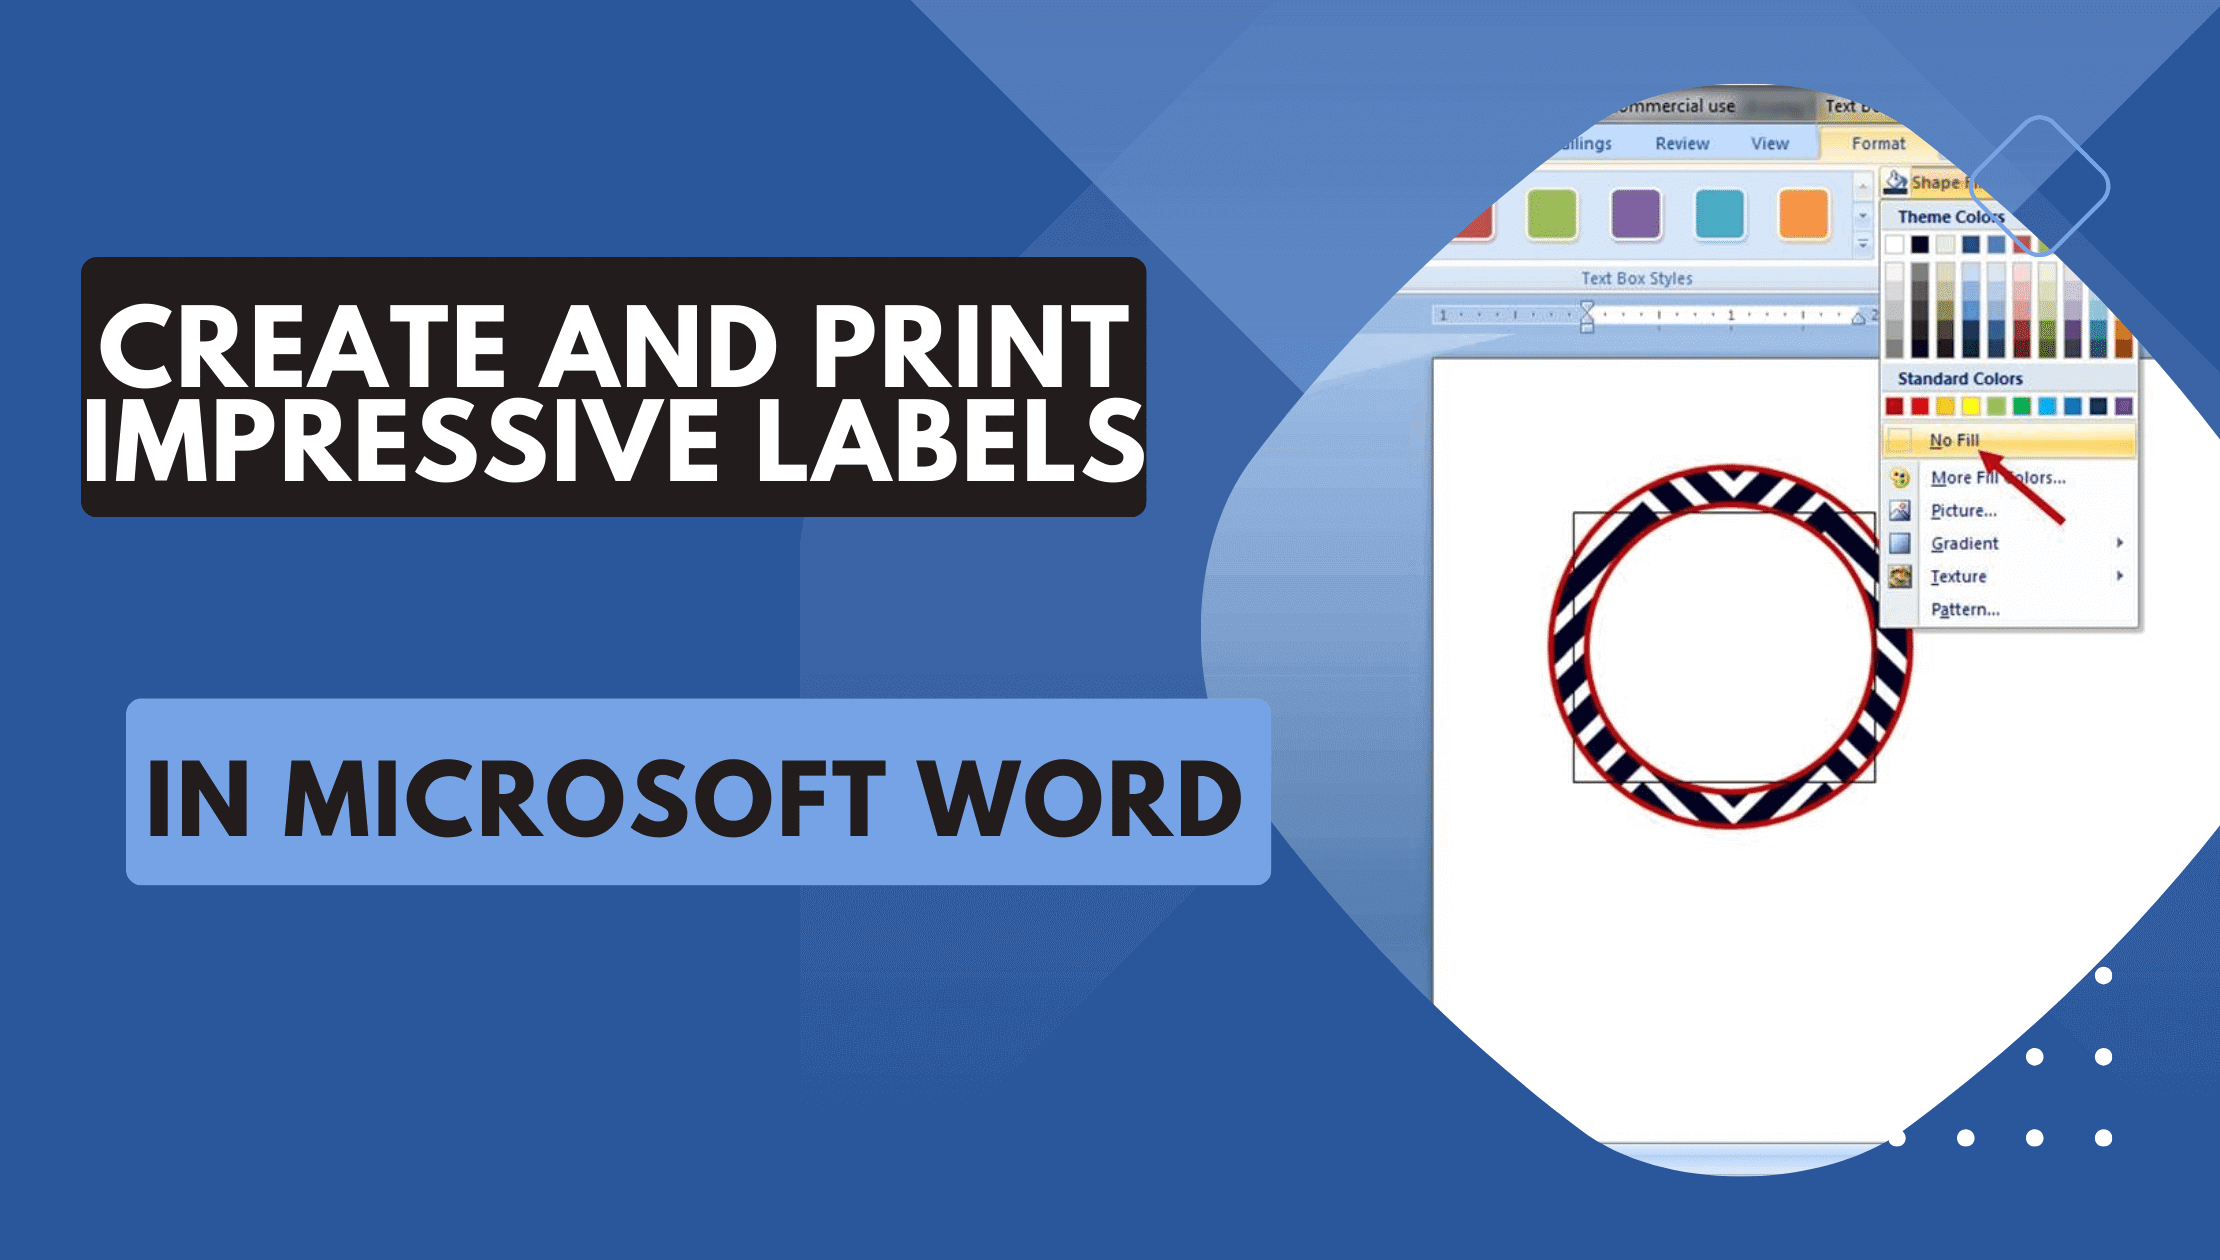 10 Pro Tips to Create and Print Impressive Labels in Microsoft Word